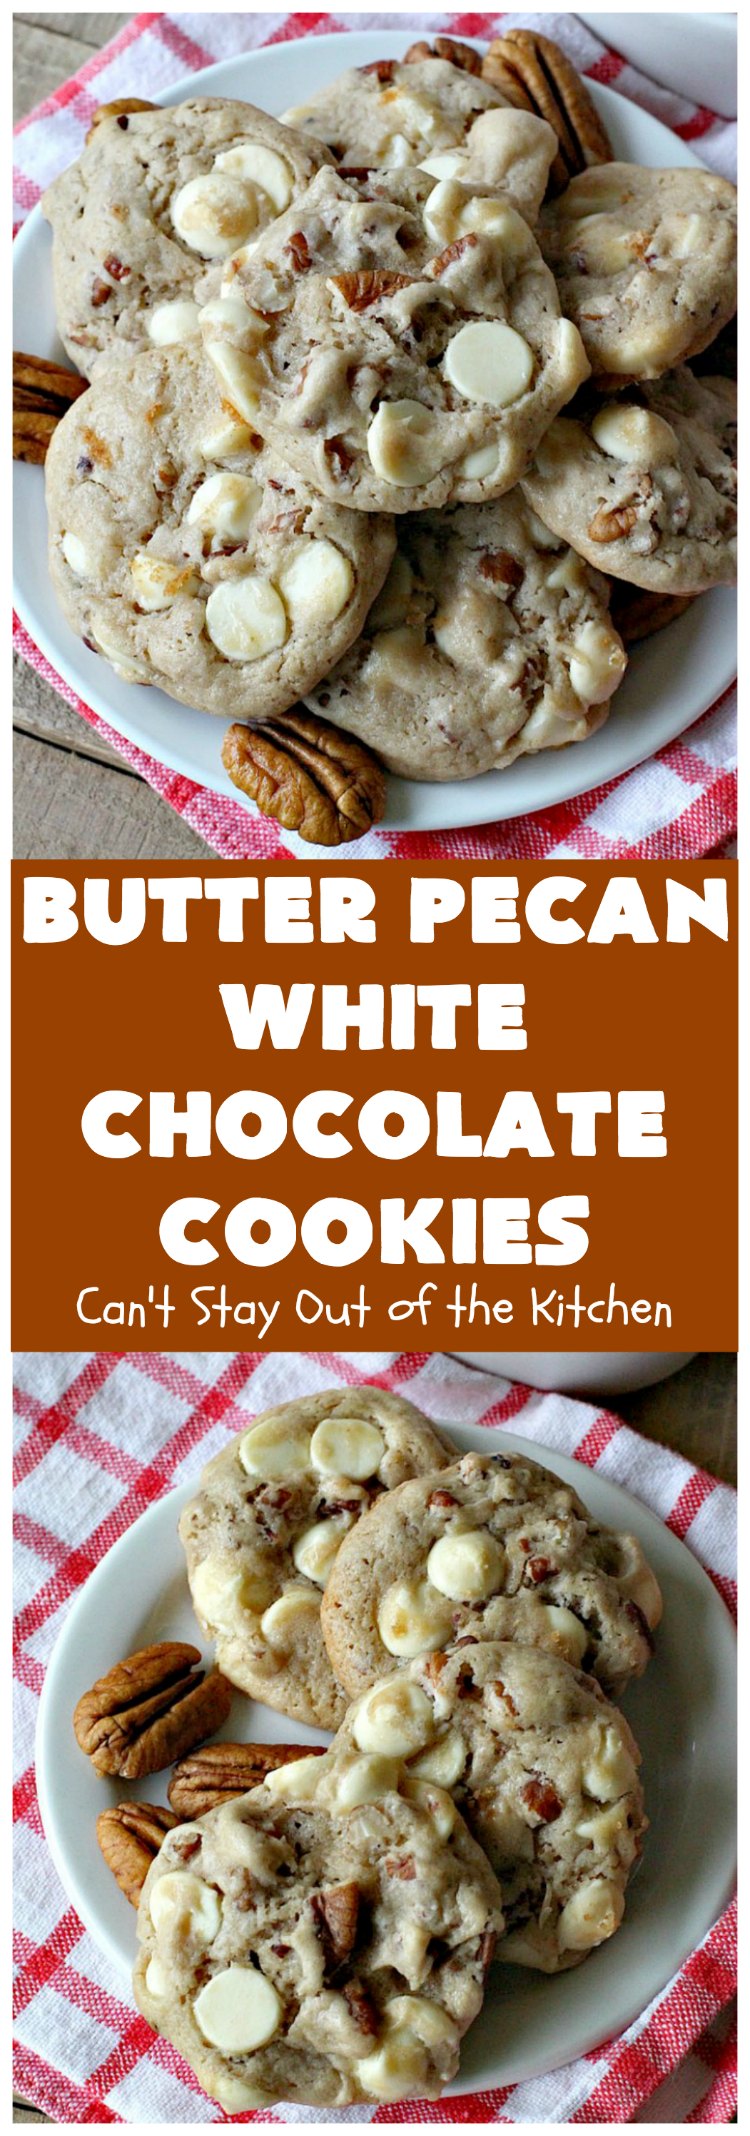 Butter Pecan White Chocolate Cookies | Can't Stay Out of the Kitchen